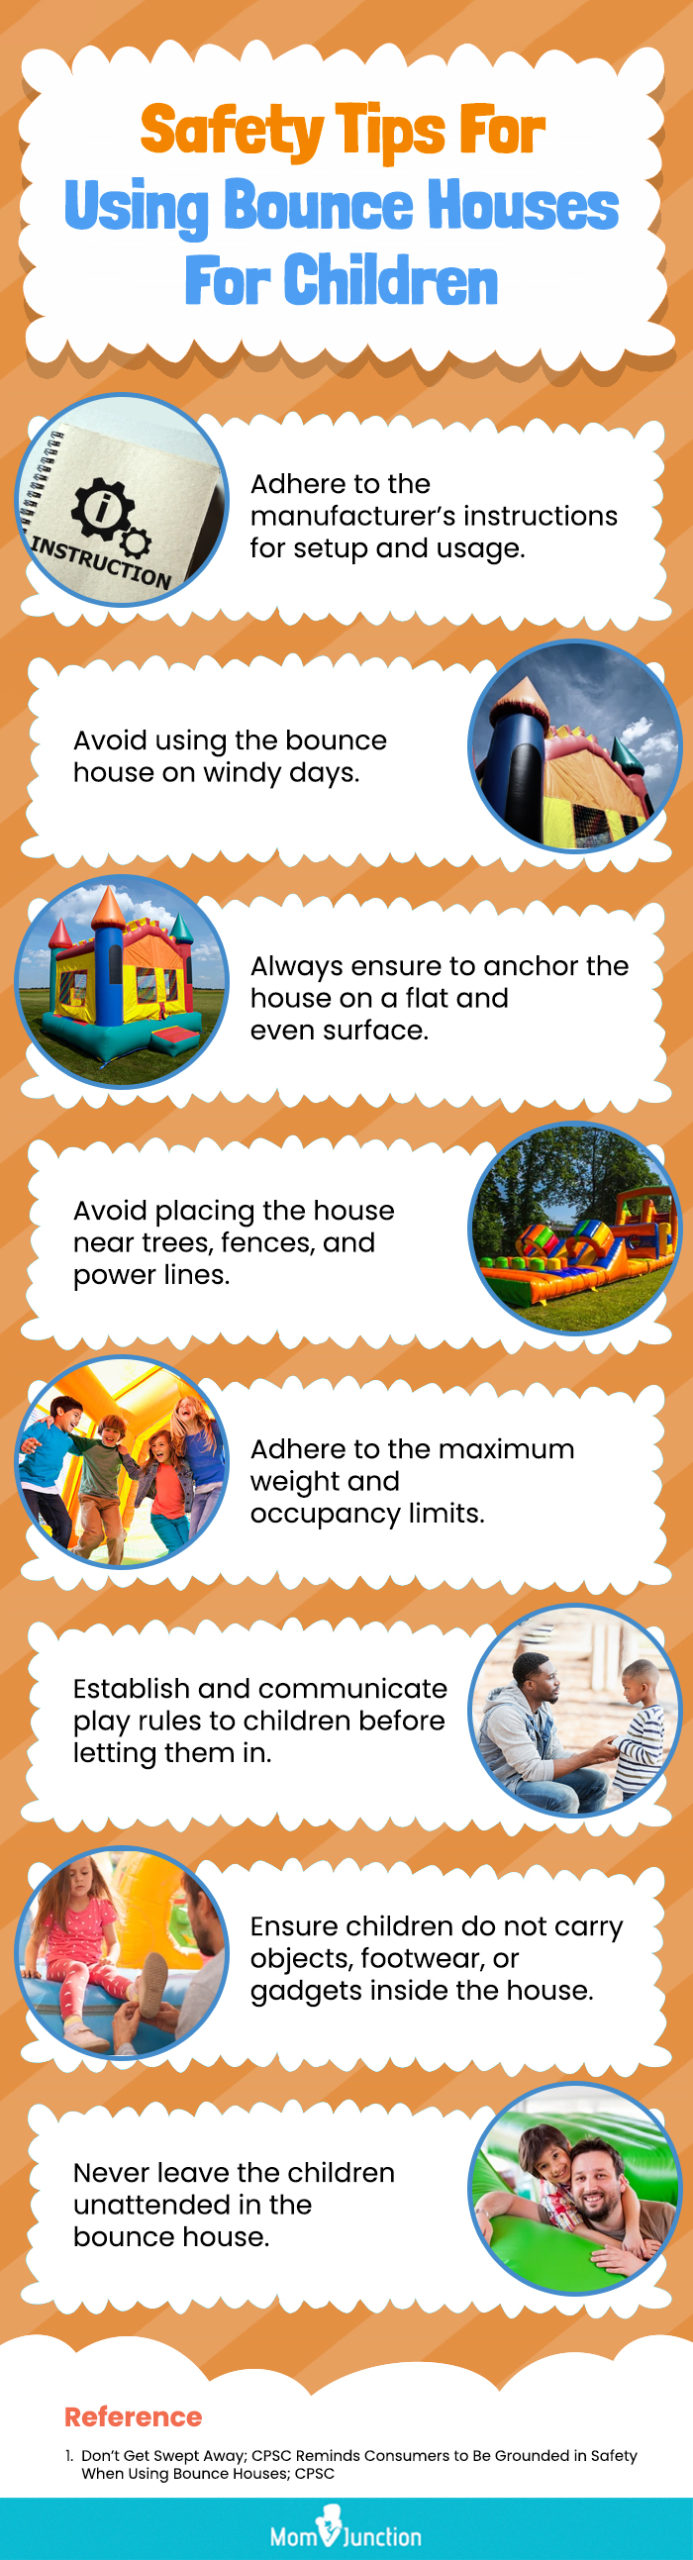 Safety Tips For Using Bounce Houses For Children (infographic)